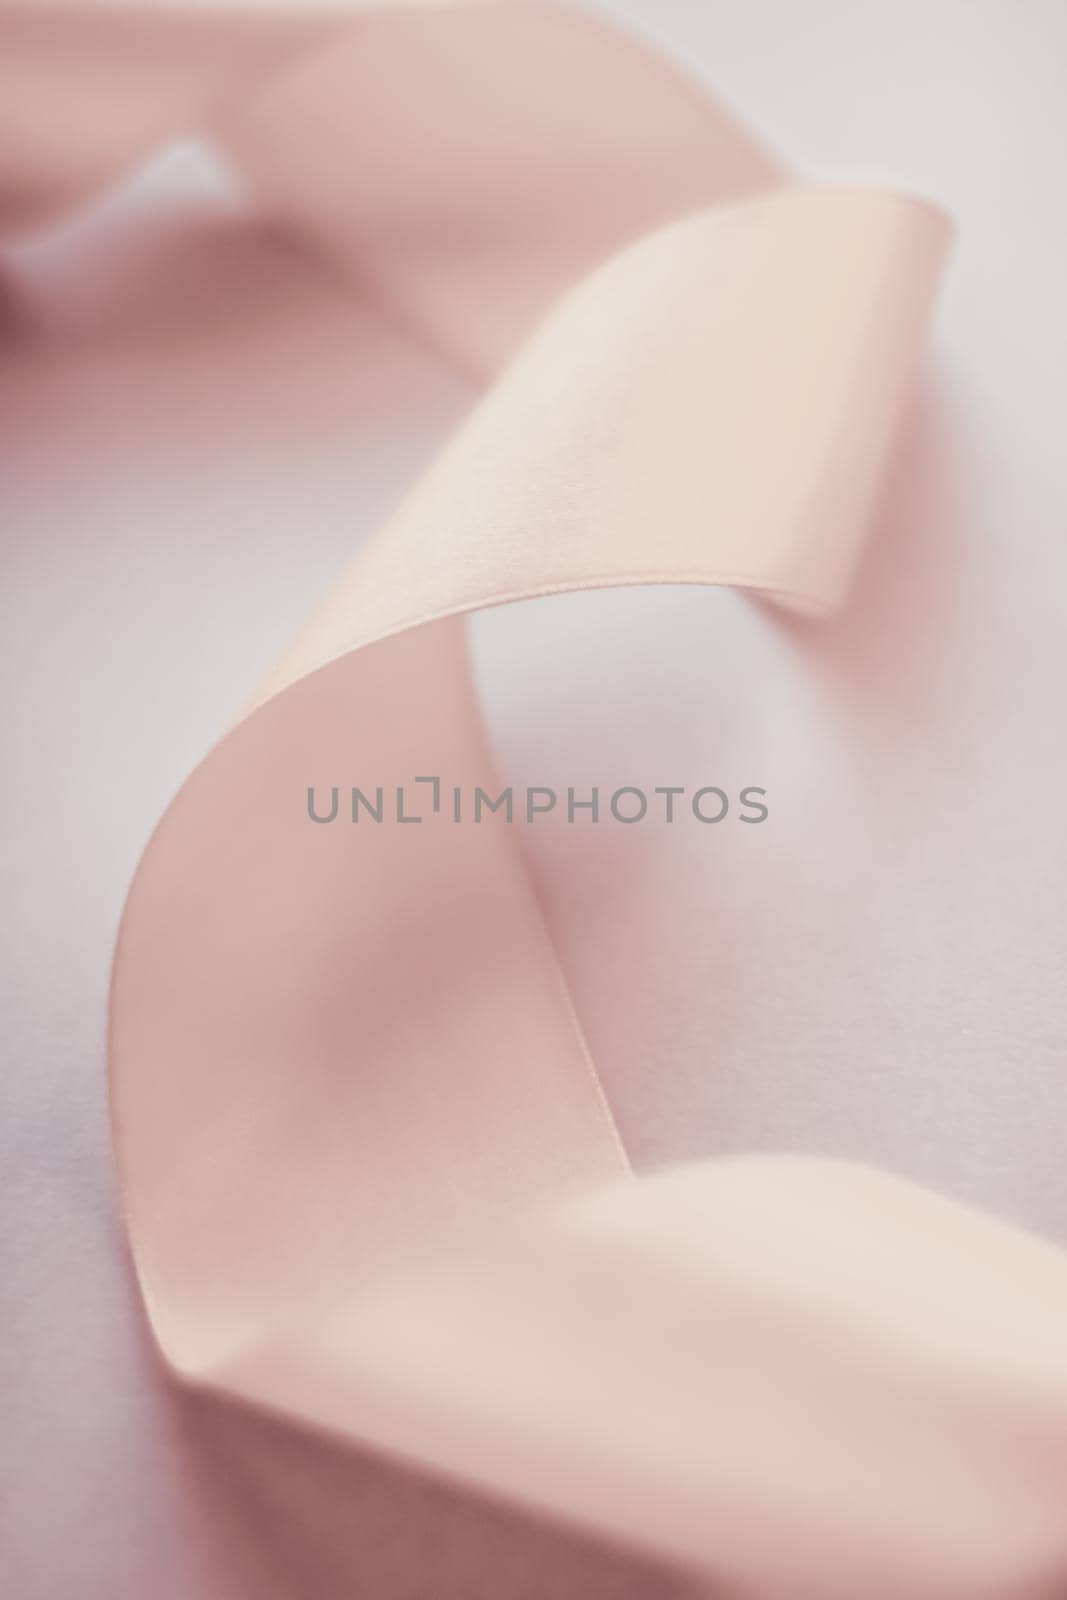 Branding, holidays and luxe brands concept - Abstract curly silk ribbon on pastel background, exclusive luxury brand design for holiday sale product promotion and glamour art invitation card backdrop